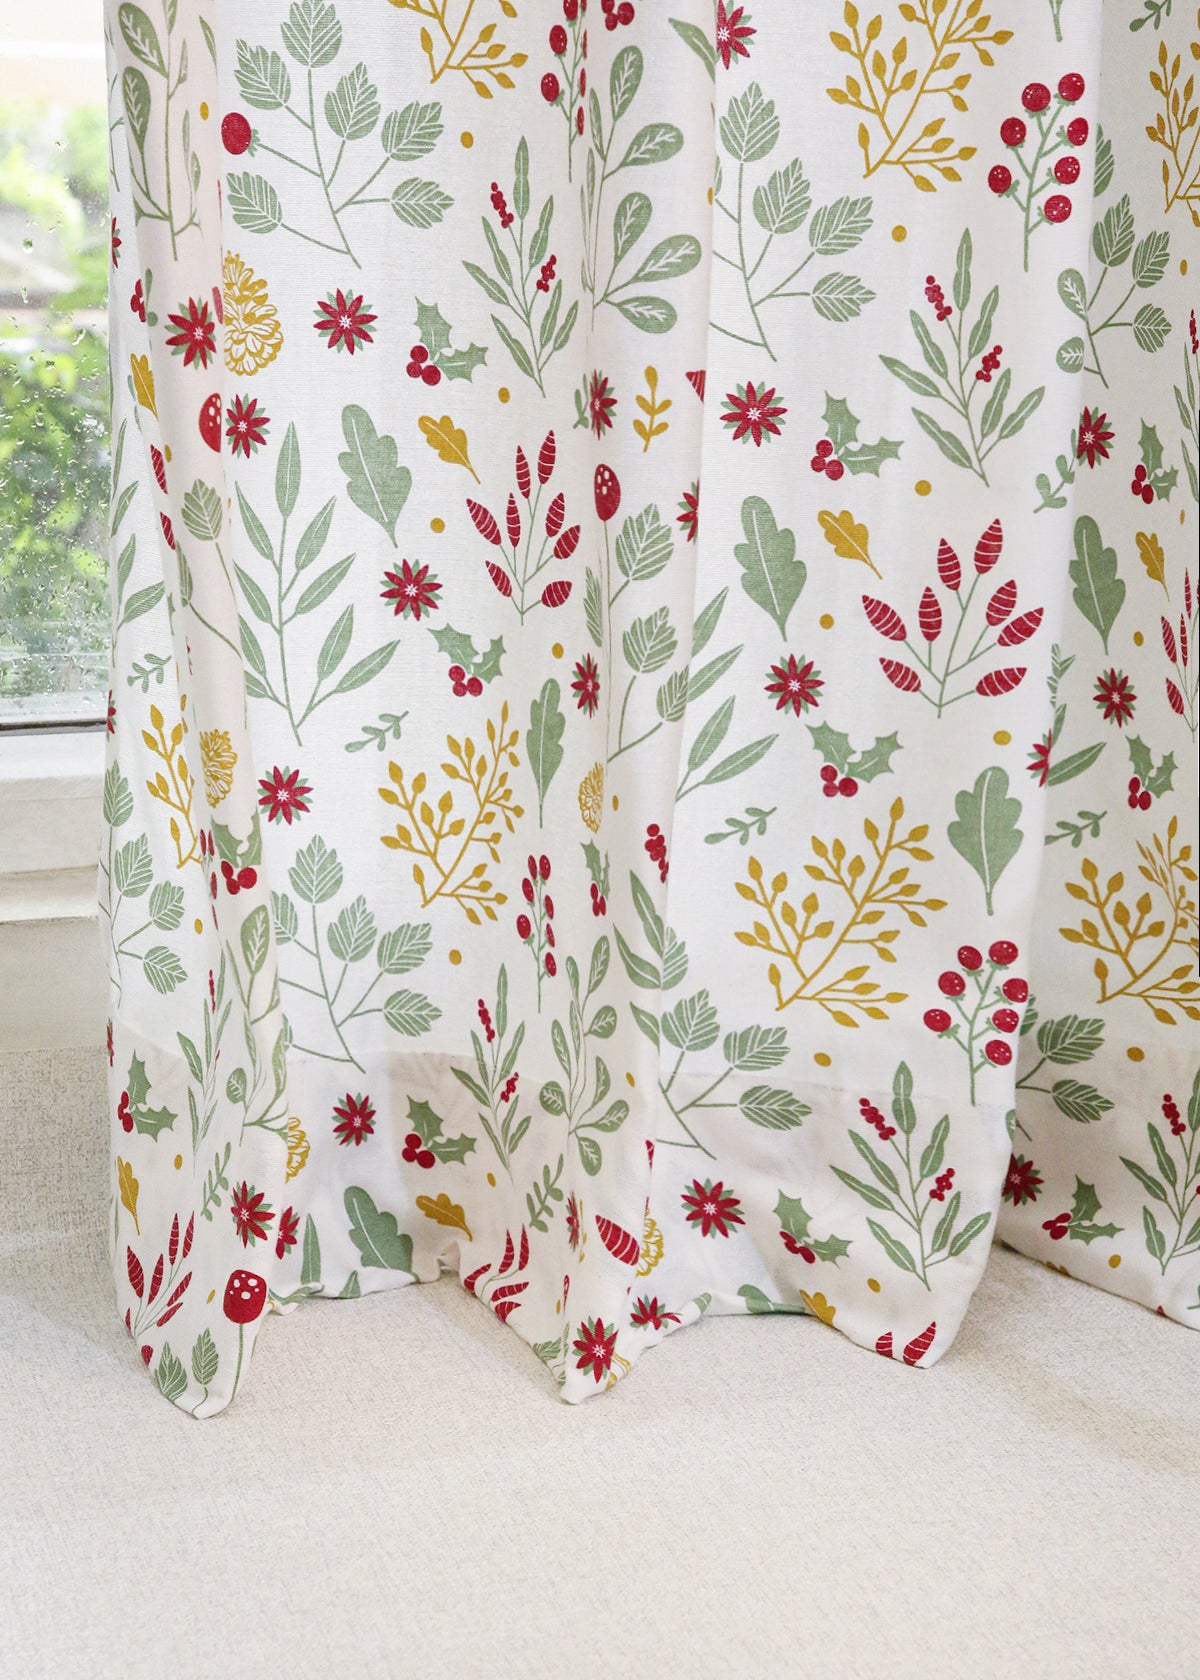 Foraged Berries 100% cotton floral curtain for living room - Room darkening - Multicolor - Pack of 1